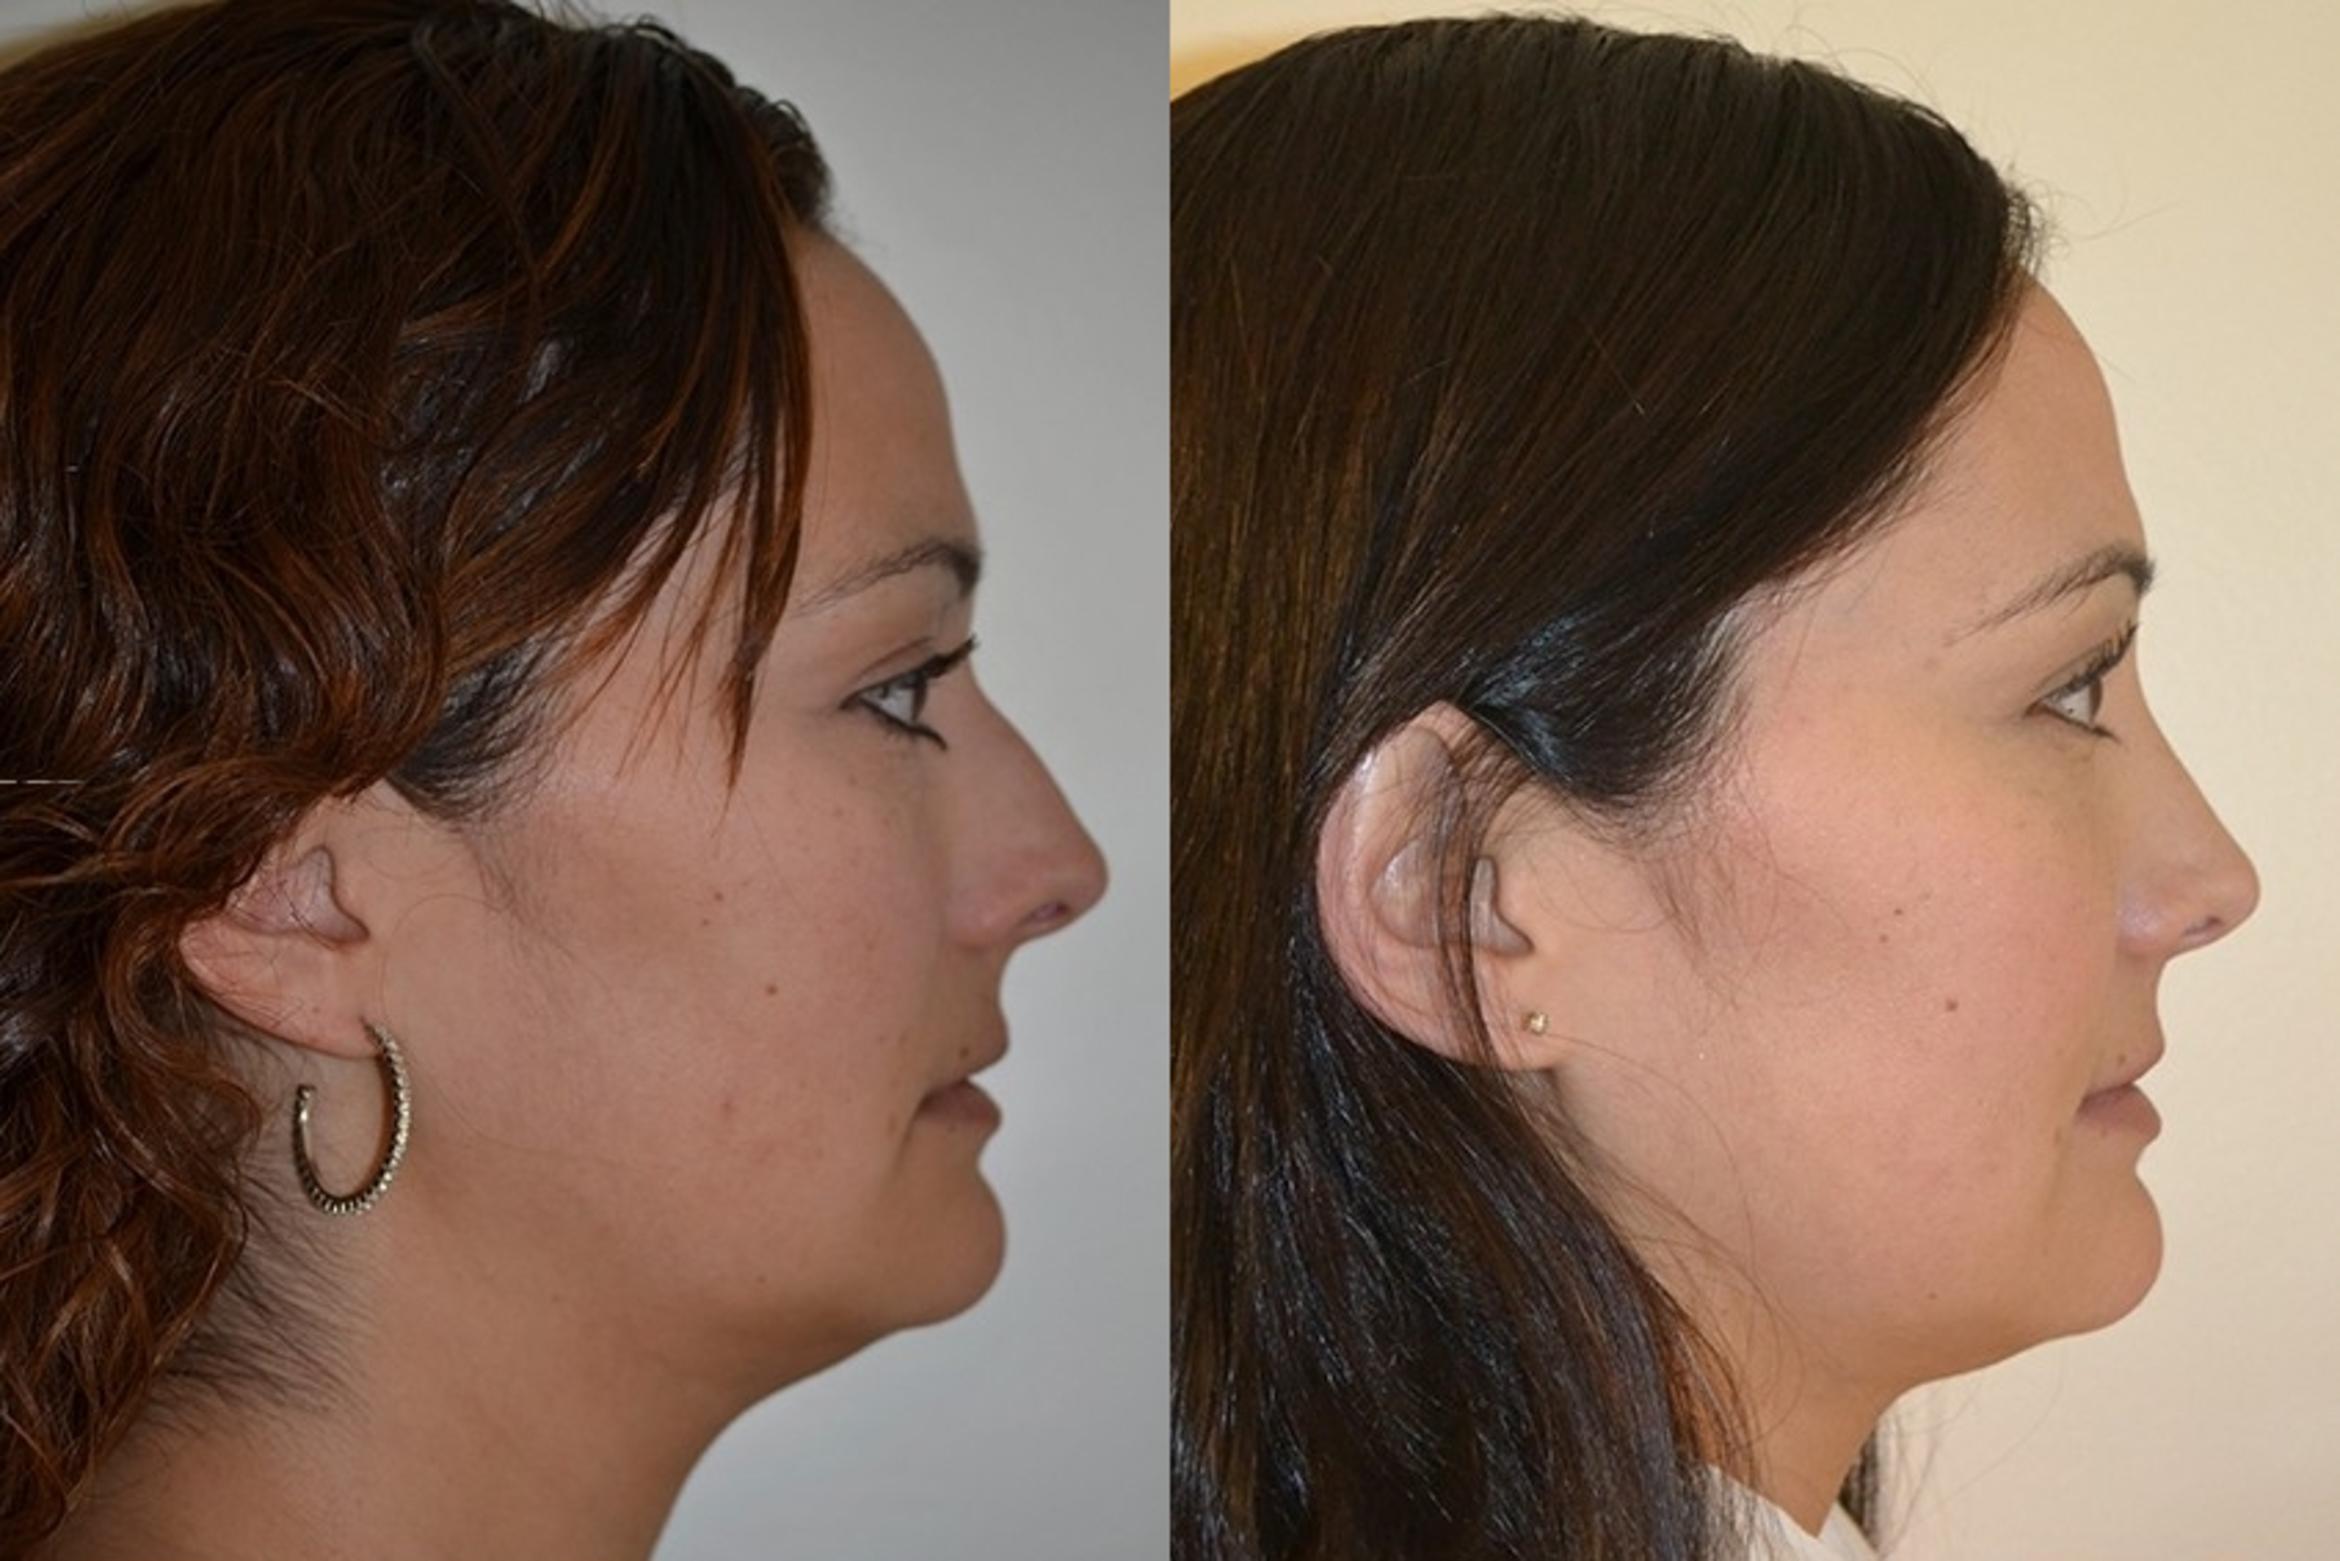 How does a closed rhinoplasty work